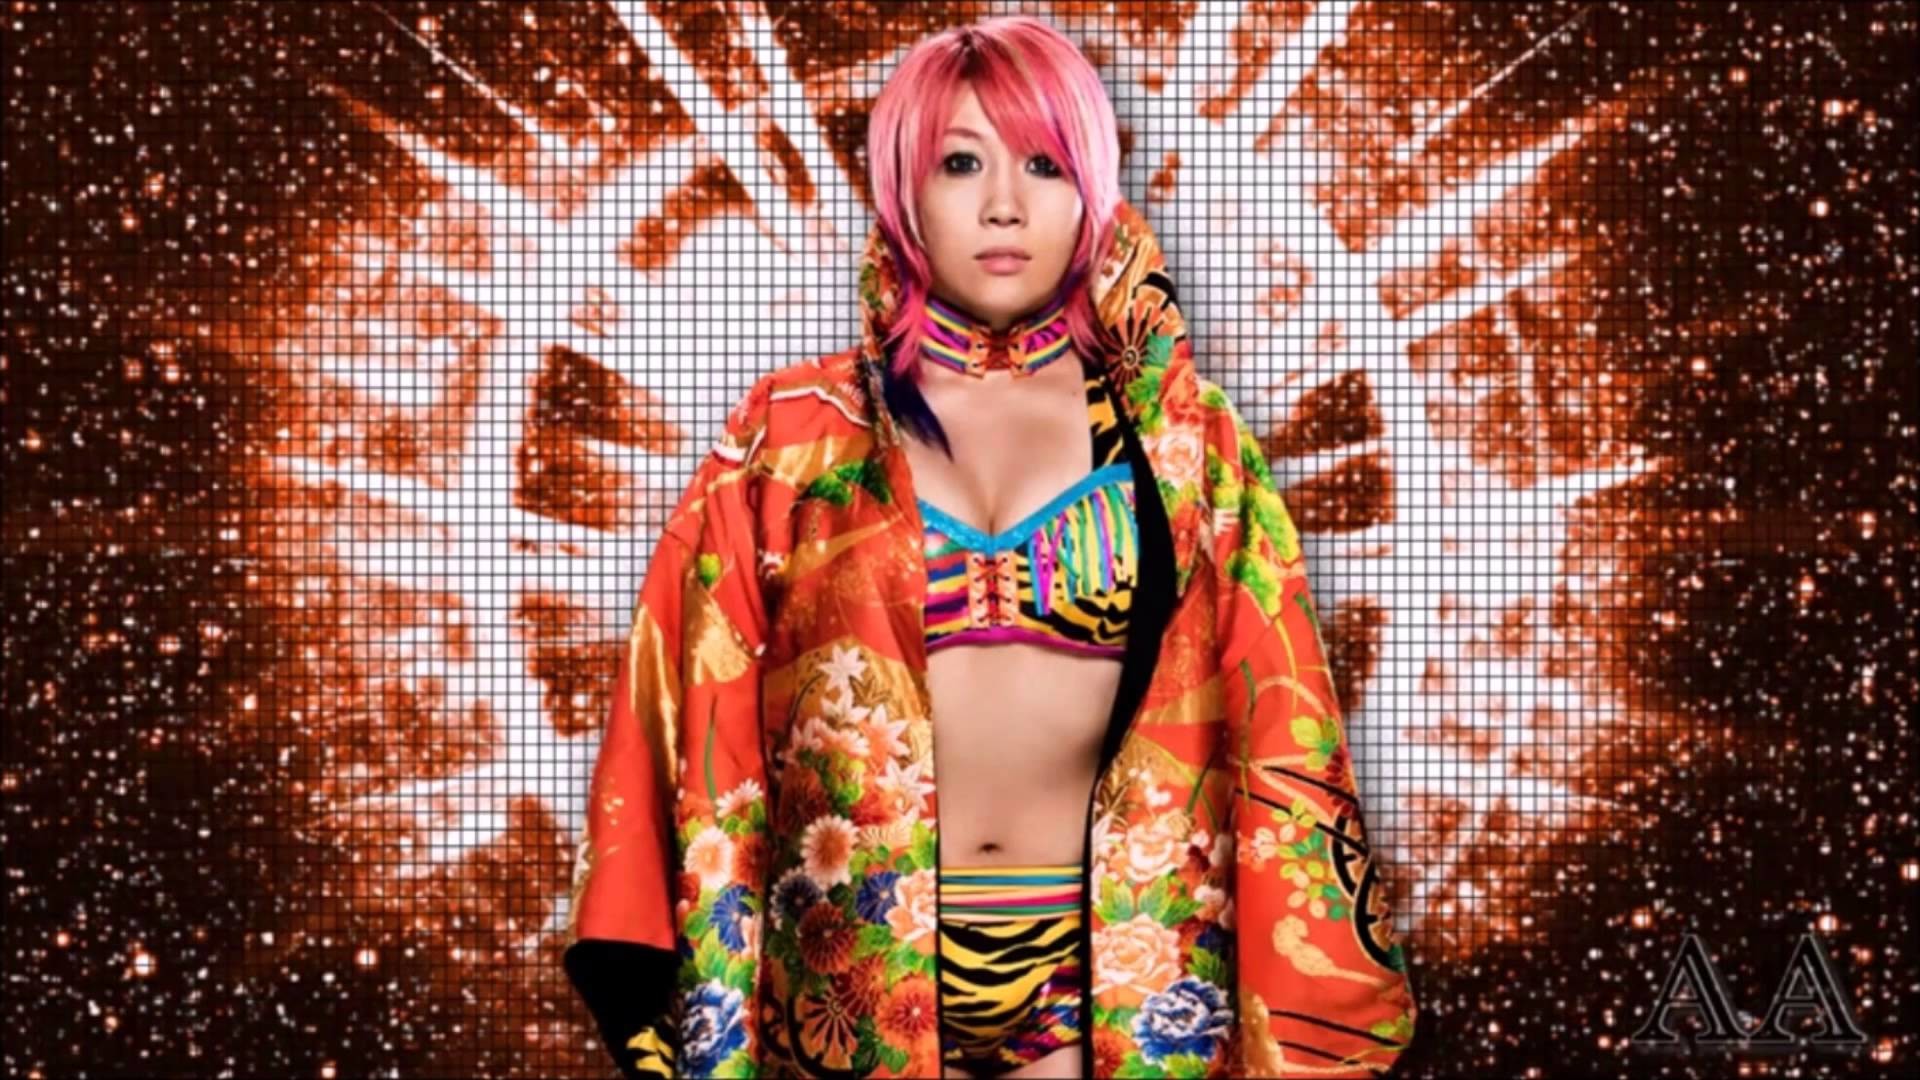 1920x1080 2015: Asuka 2nd WWE NXT Theme Song - The Future